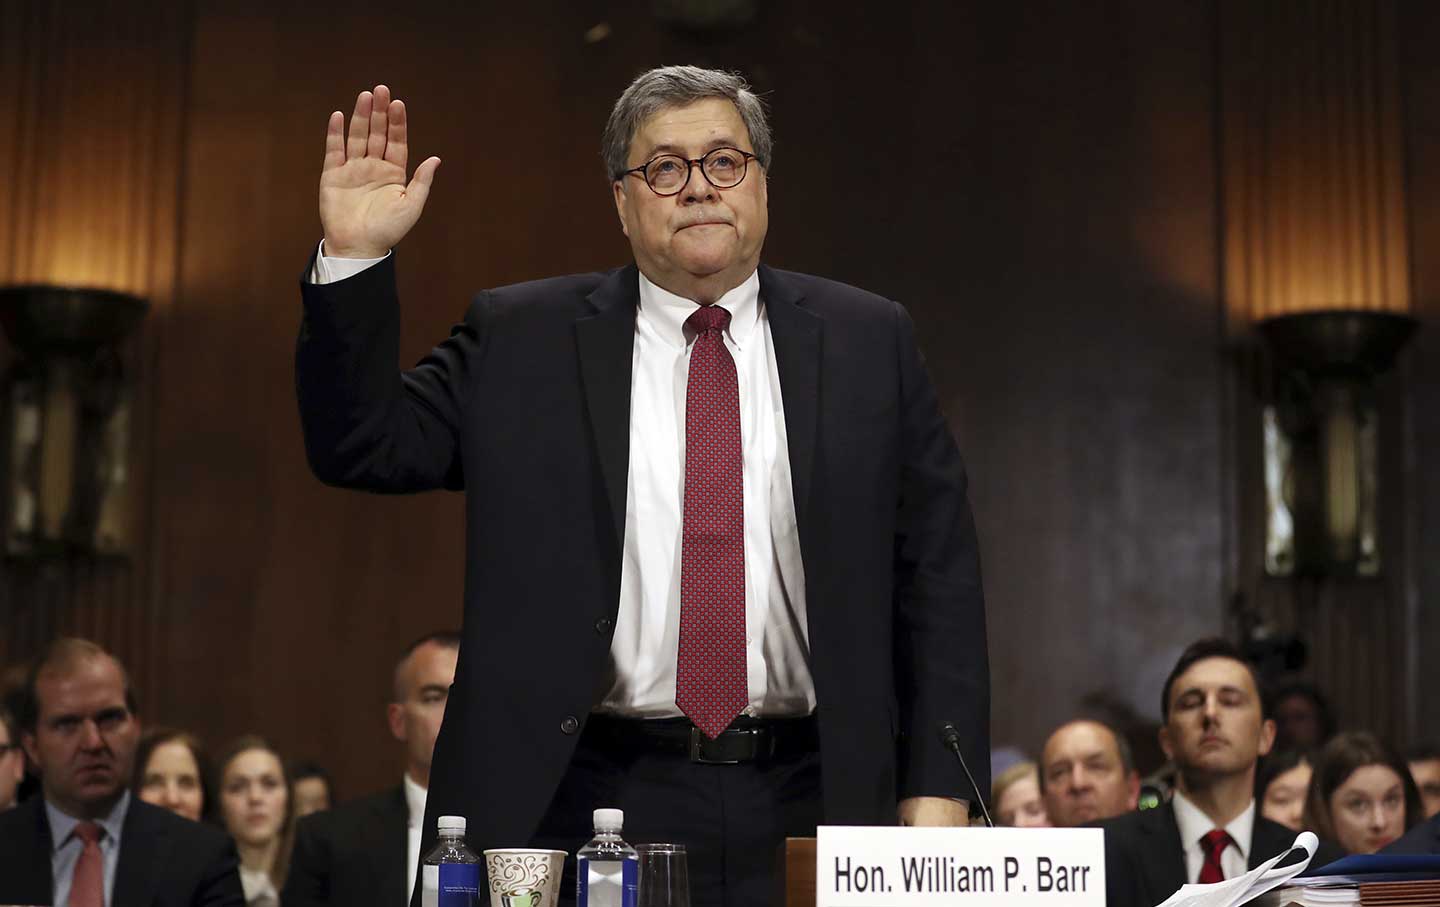 William Barr Is Acting as Trump’s Defense Lawyer, Not Attorney General